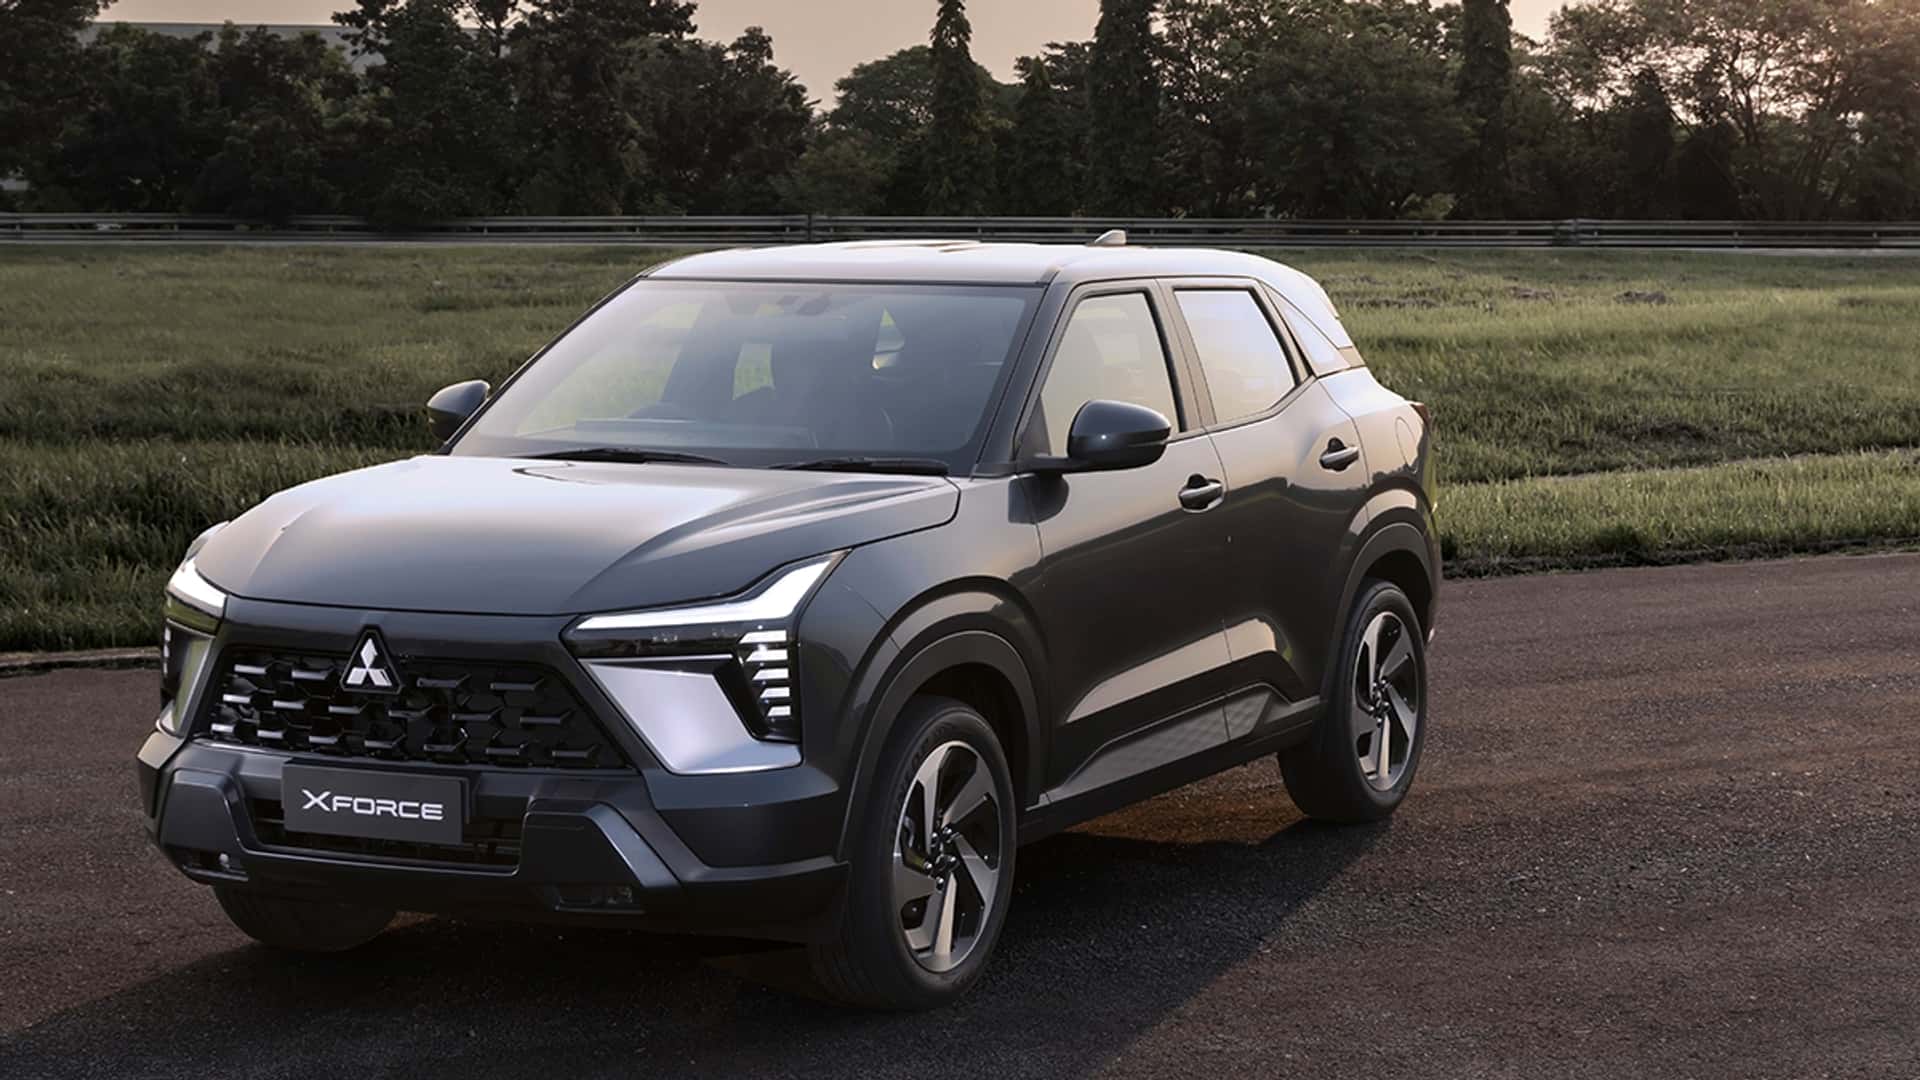 Driving Elevated: Mitsubishi XForce Introduces Luxury Ground Clearance and Dynamic Drive Experience